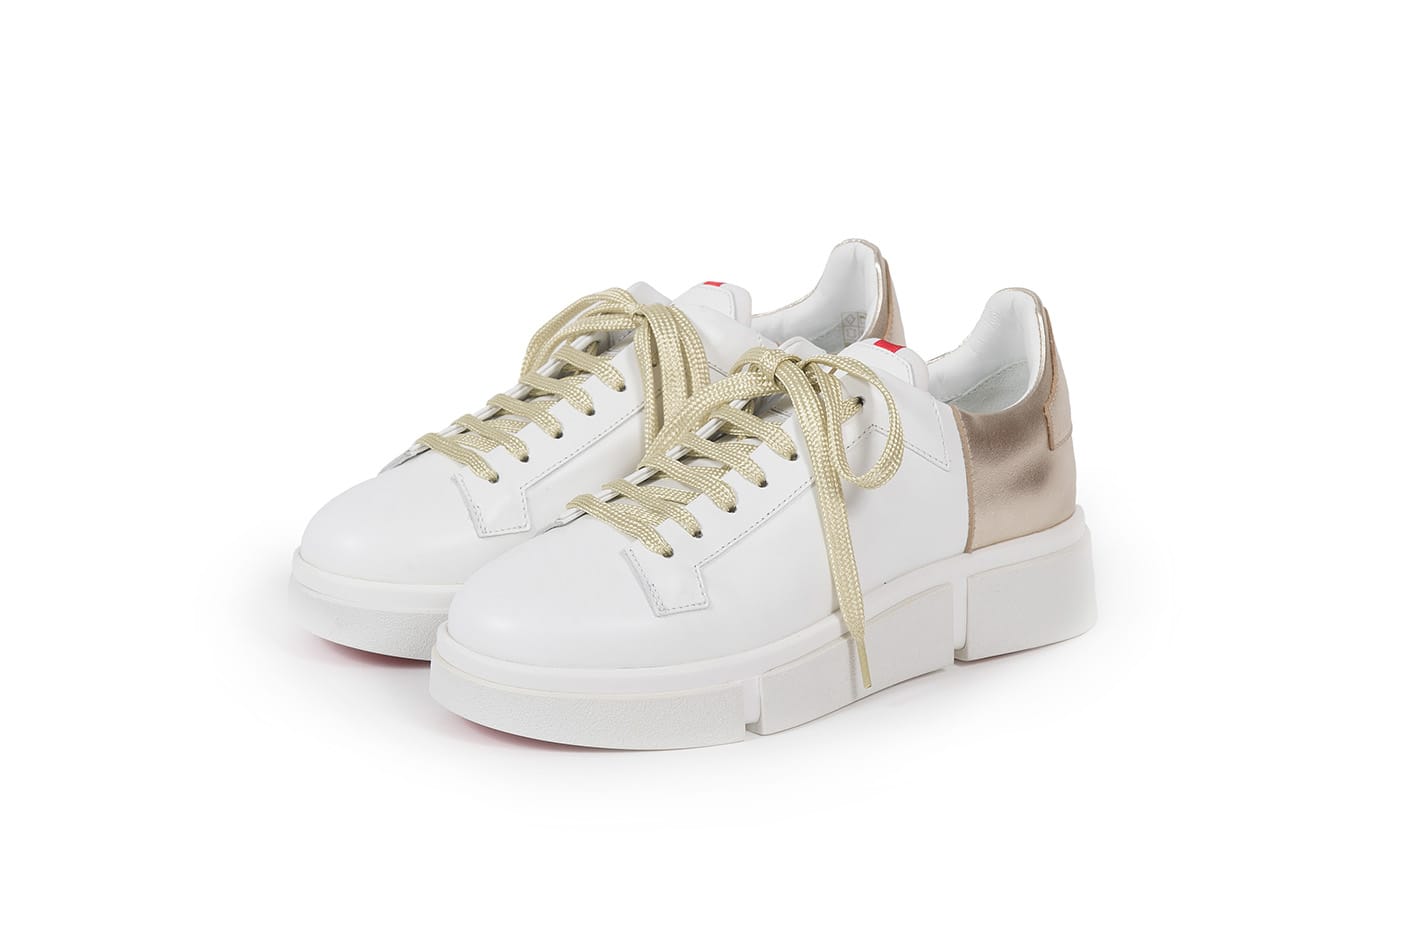 V DESIGN - SNEAKERS,WACT02 WHITE GOLD